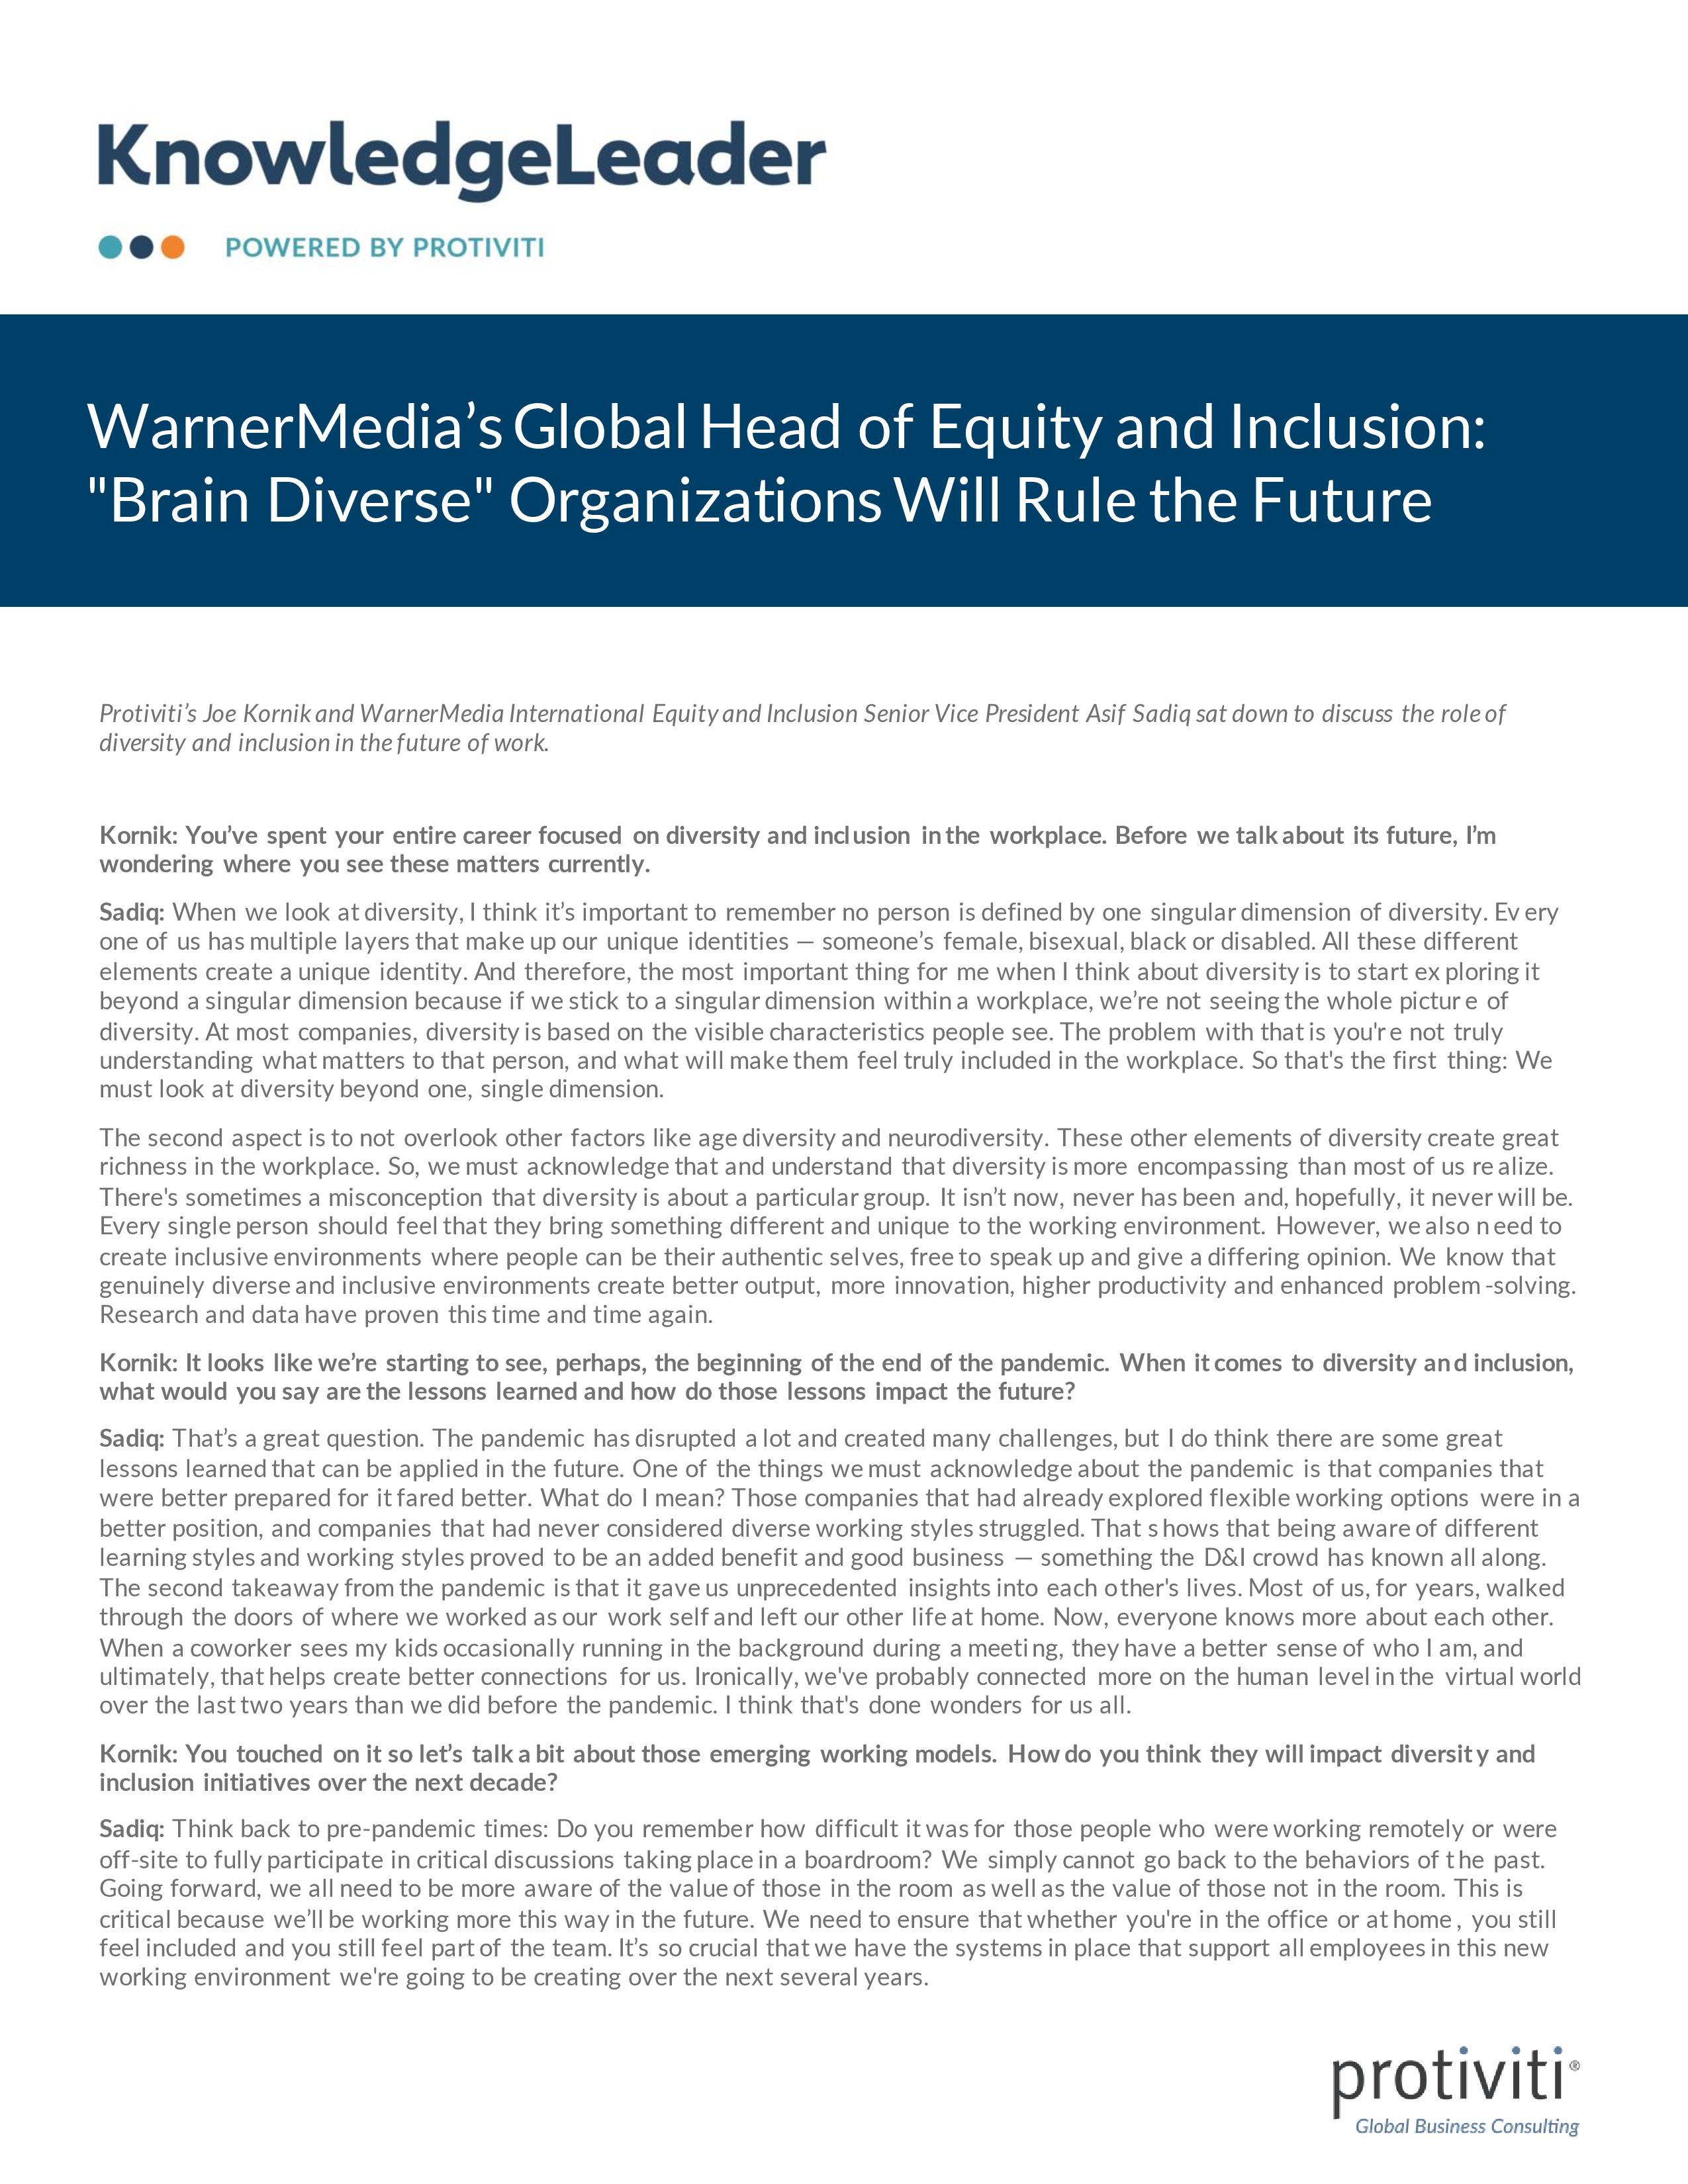 Screenshot of the first page of WarnerMedia’s Global Head of Equity and Inclusion Brain Diverse Organizations Will Rule the Future